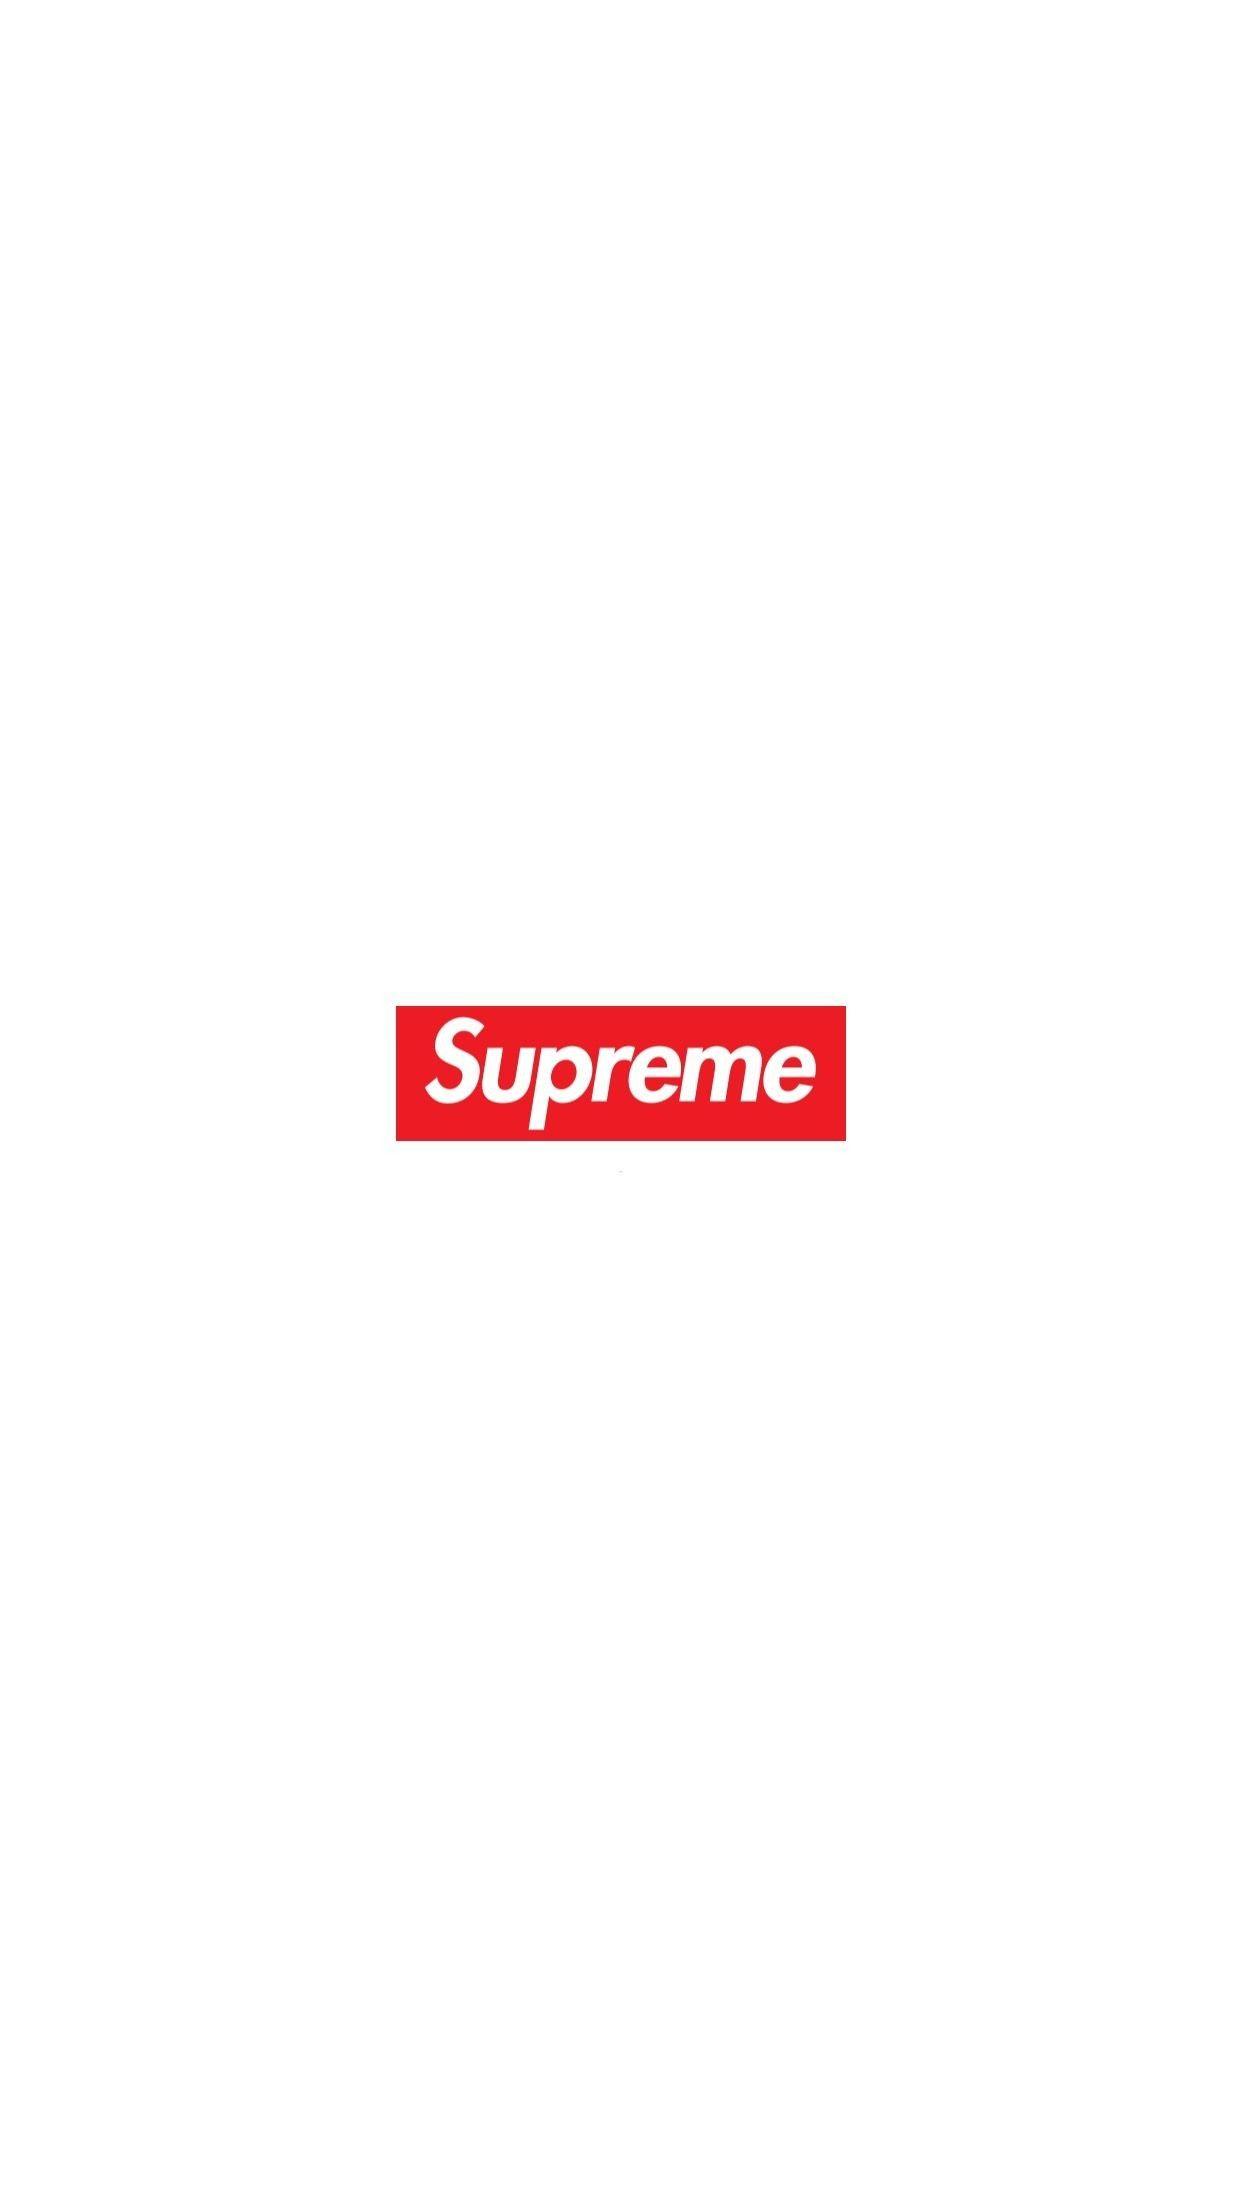 Supreme Weed Wallpapers - Top Free Supreme Weed Backgrounds ...